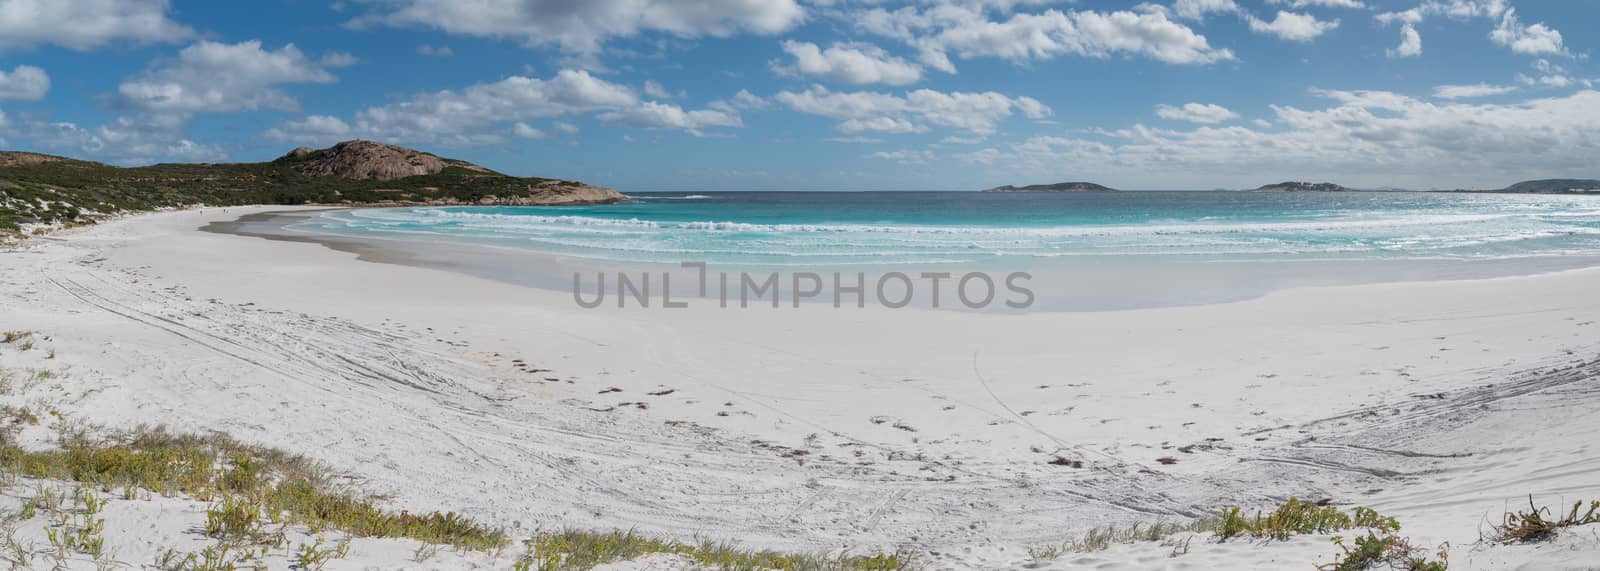 White Wharton Beach on a summer day, one of the most beautiful places in the Cape Le Grand National Park, Western Australia